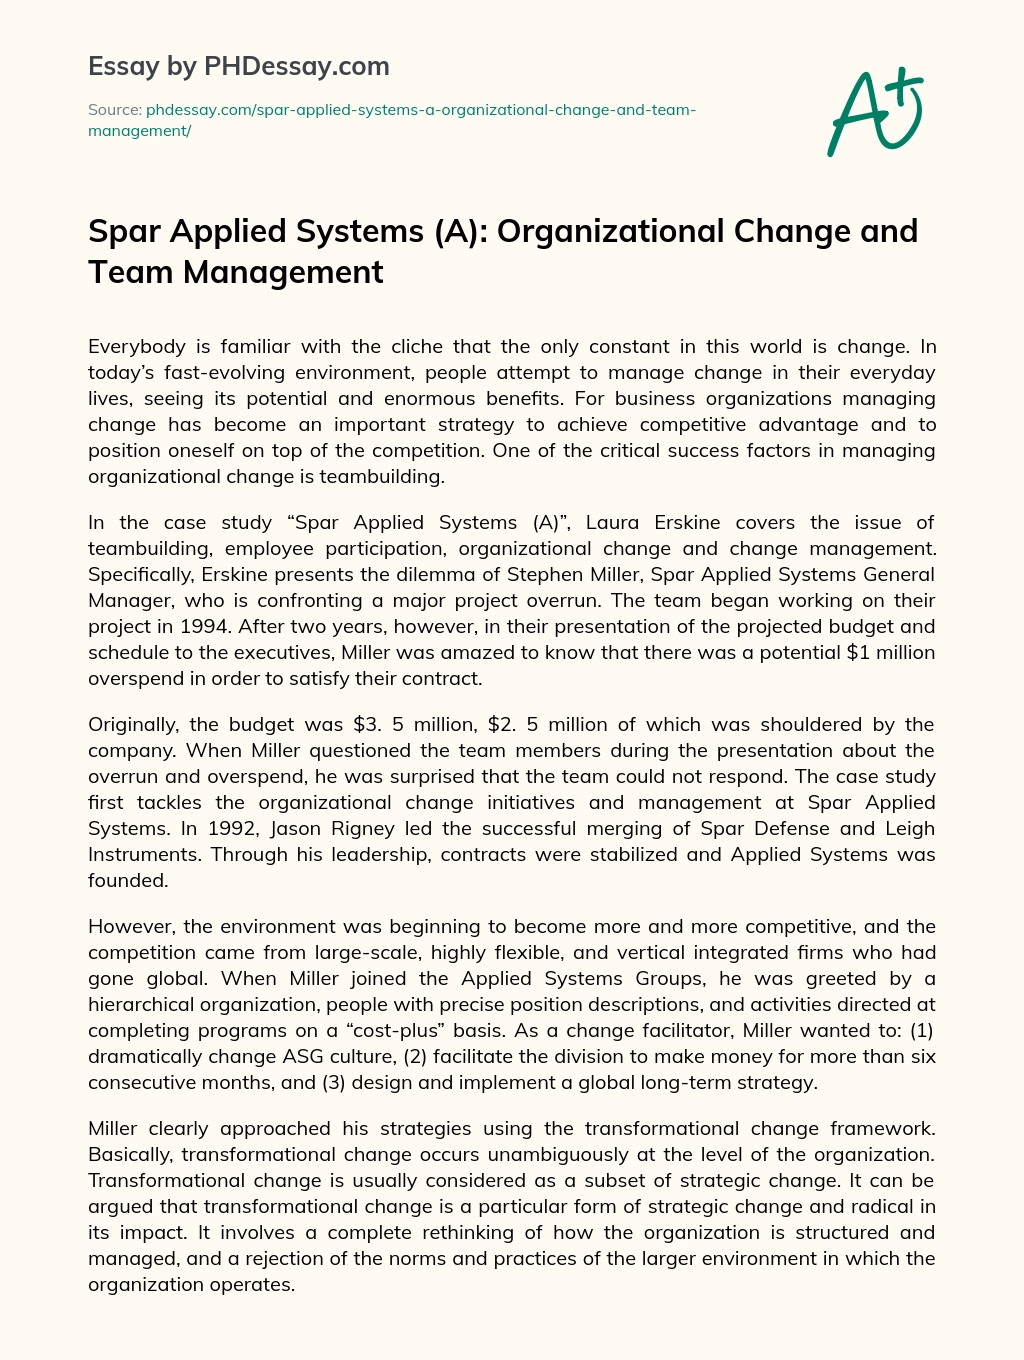 Spar Applied Systems (A): Organizational Change and Team Management essay